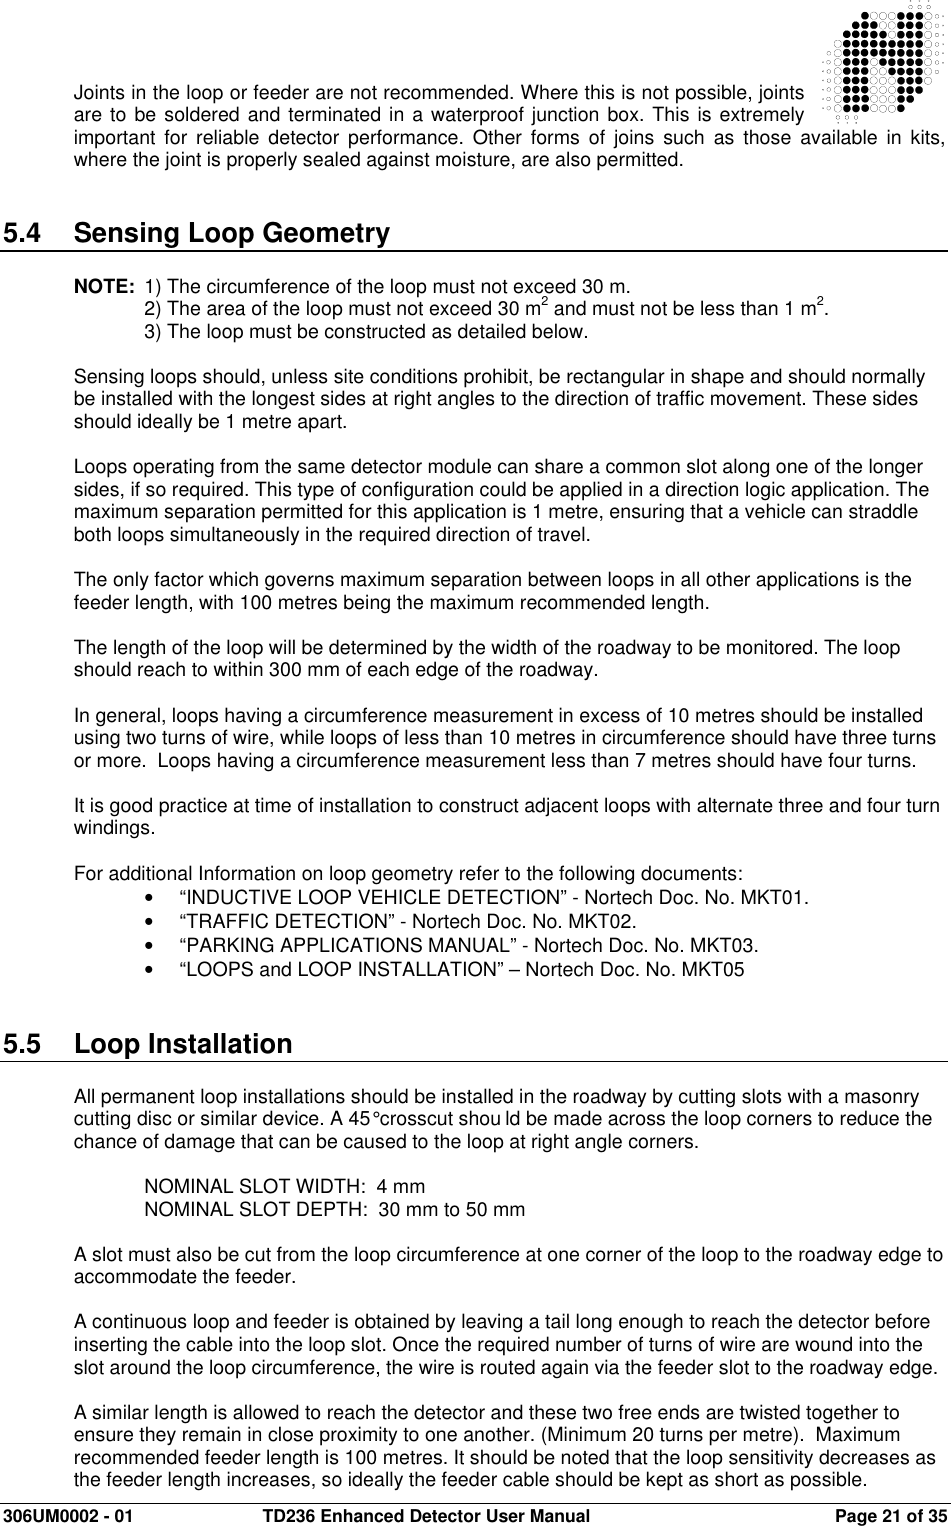  306UM0002 - 01  TD236 Enhanced Detector User Manual   Page 21 of 35   Joints in the loop or feeder are not recommended. Where this is not possible, joints are to be soldered and terminated in a waterproof junction box. This is extremely important  for  reliable  detector  performance.  Other  forms  of  joins  such  as  those  available  in kits, where the joint is properly sealed against moisture, are also permitted.   5.4  Sensing Loop Geometry  NOTE:  1) The circumference of the loop must not exceed 30 m.  2) The area of the loop must not exceed 30 m2 and must not be less than 1 m2.   3) The loop must be constructed as detailed below.  Sensing loops should, unless site conditions prohibit, be rectangular in shape and should normally be installed with the longest sides at right angles to the direction of traffic movement. These sides should ideally be 1 metre apart.   Loops operating from the same detector module can share a common slot along one of the longer sides, if so required. This type of configuration could be applied in a direction logic application. The maximum separation permitted for this application is 1 metre, ensuring that a vehicle can straddle both loops simultaneously in the required direction of travel.    The only factor which governs maximum separation between loops in all other applications is the feeder length, with 100 metres being the maximum recommended length.  The length of the loop will be determined by the width of the roadway to be monitored. The loop should reach to within 300 mm of each edge of the roadway.  In general, loops having a circumference measurement in excess of 10 metres should be installed using two turns of wire, while loops of less than 10 metres in circumference should have three turns or more.  Loops having a circumference measurement less than 7 metres should have four turns.   It is good practice at time of installation to construct adjacent loops with alternate three and four turn windings.  For additional Information on loop geometry refer to the following documents: •  “INDUCTIVE LOOP VEHICLE DETECTION” - Nortech Doc. No. MKT01. •  “TRAFFIC DETECTION” - Nortech Doc. No. MKT02. •  “PARKING APPLICATIONS MANUAL” - Nortech Doc. No. MKT03. •  “LOOPS and LOOP INSTALLATION” – Nortech Doc. No. MKT05   5.5  Loop Installation   All permanent loop installations should be installed in the roadway by cutting slots with a masonry cutting disc or similar device. A 45° crosscut shou ld be made across the loop corners to reduce the chance of damage that can be caused to the loop at right angle corners.  NOMINAL SLOT WIDTH:  4 mm  NOMINAL SLOT DEPTH:  30 mm to 50 mm  A slot must also be cut from the loop circumference at one corner of the loop to the roadway edge to accommodate the feeder.  A continuous loop and feeder is obtained by leaving a tail long enough to reach the detector before inserting the cable into the loop slot. Once the required number of turns of wire are wound into the slot around the loop circumference, the wire is routed again via the feeder slot to the roadway edge.  A similar length is allowed to reach the detector and these two free ends are twisted together to ensure they remain in close proximity to one another. (Minimum 20 turns per metre).  Maximum recommended feeder length is 100 metres. It should be noted that the loop sensitivity decreases as the feeder length increases, so ideally the feeder cable should be kept as short as possible. 